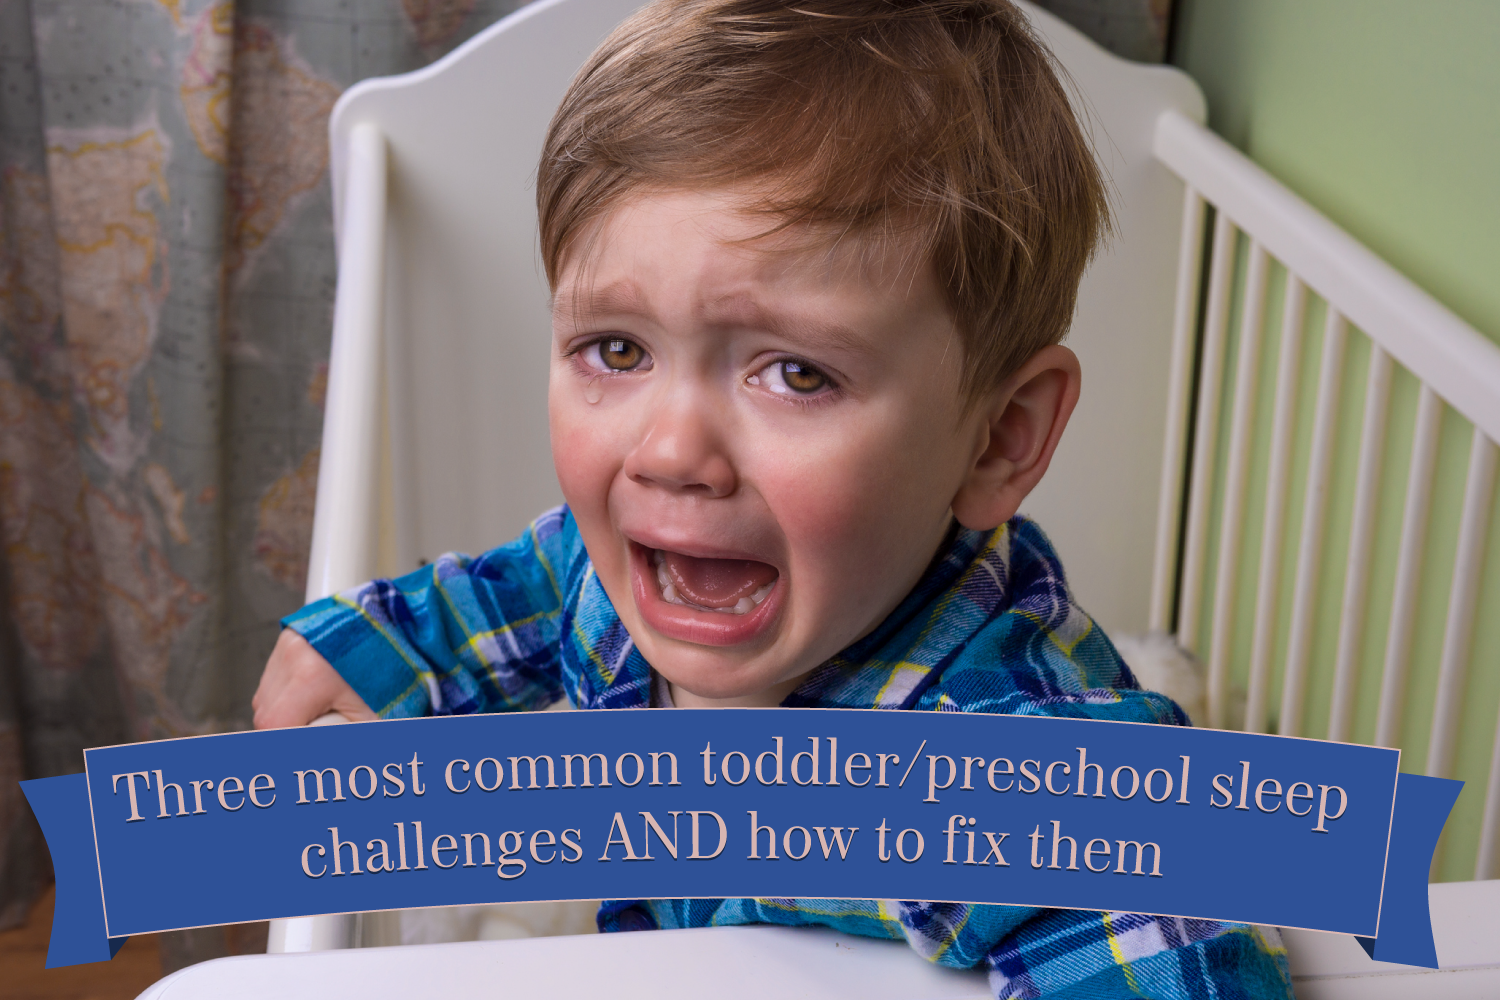 Three most common toddler/preschool sleep challenges AND how to fix them